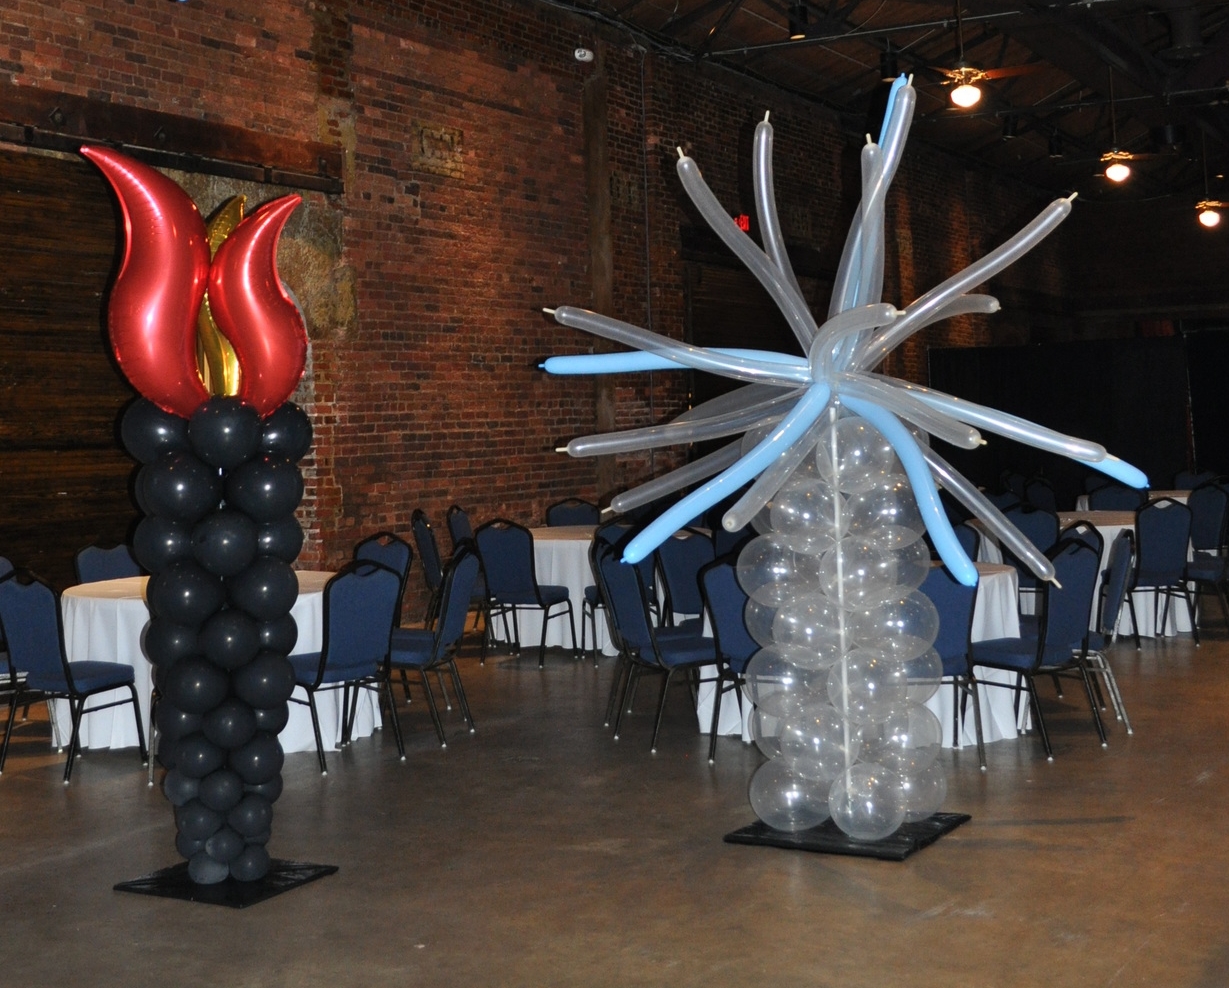 Fire and ice themed prom balloon columns